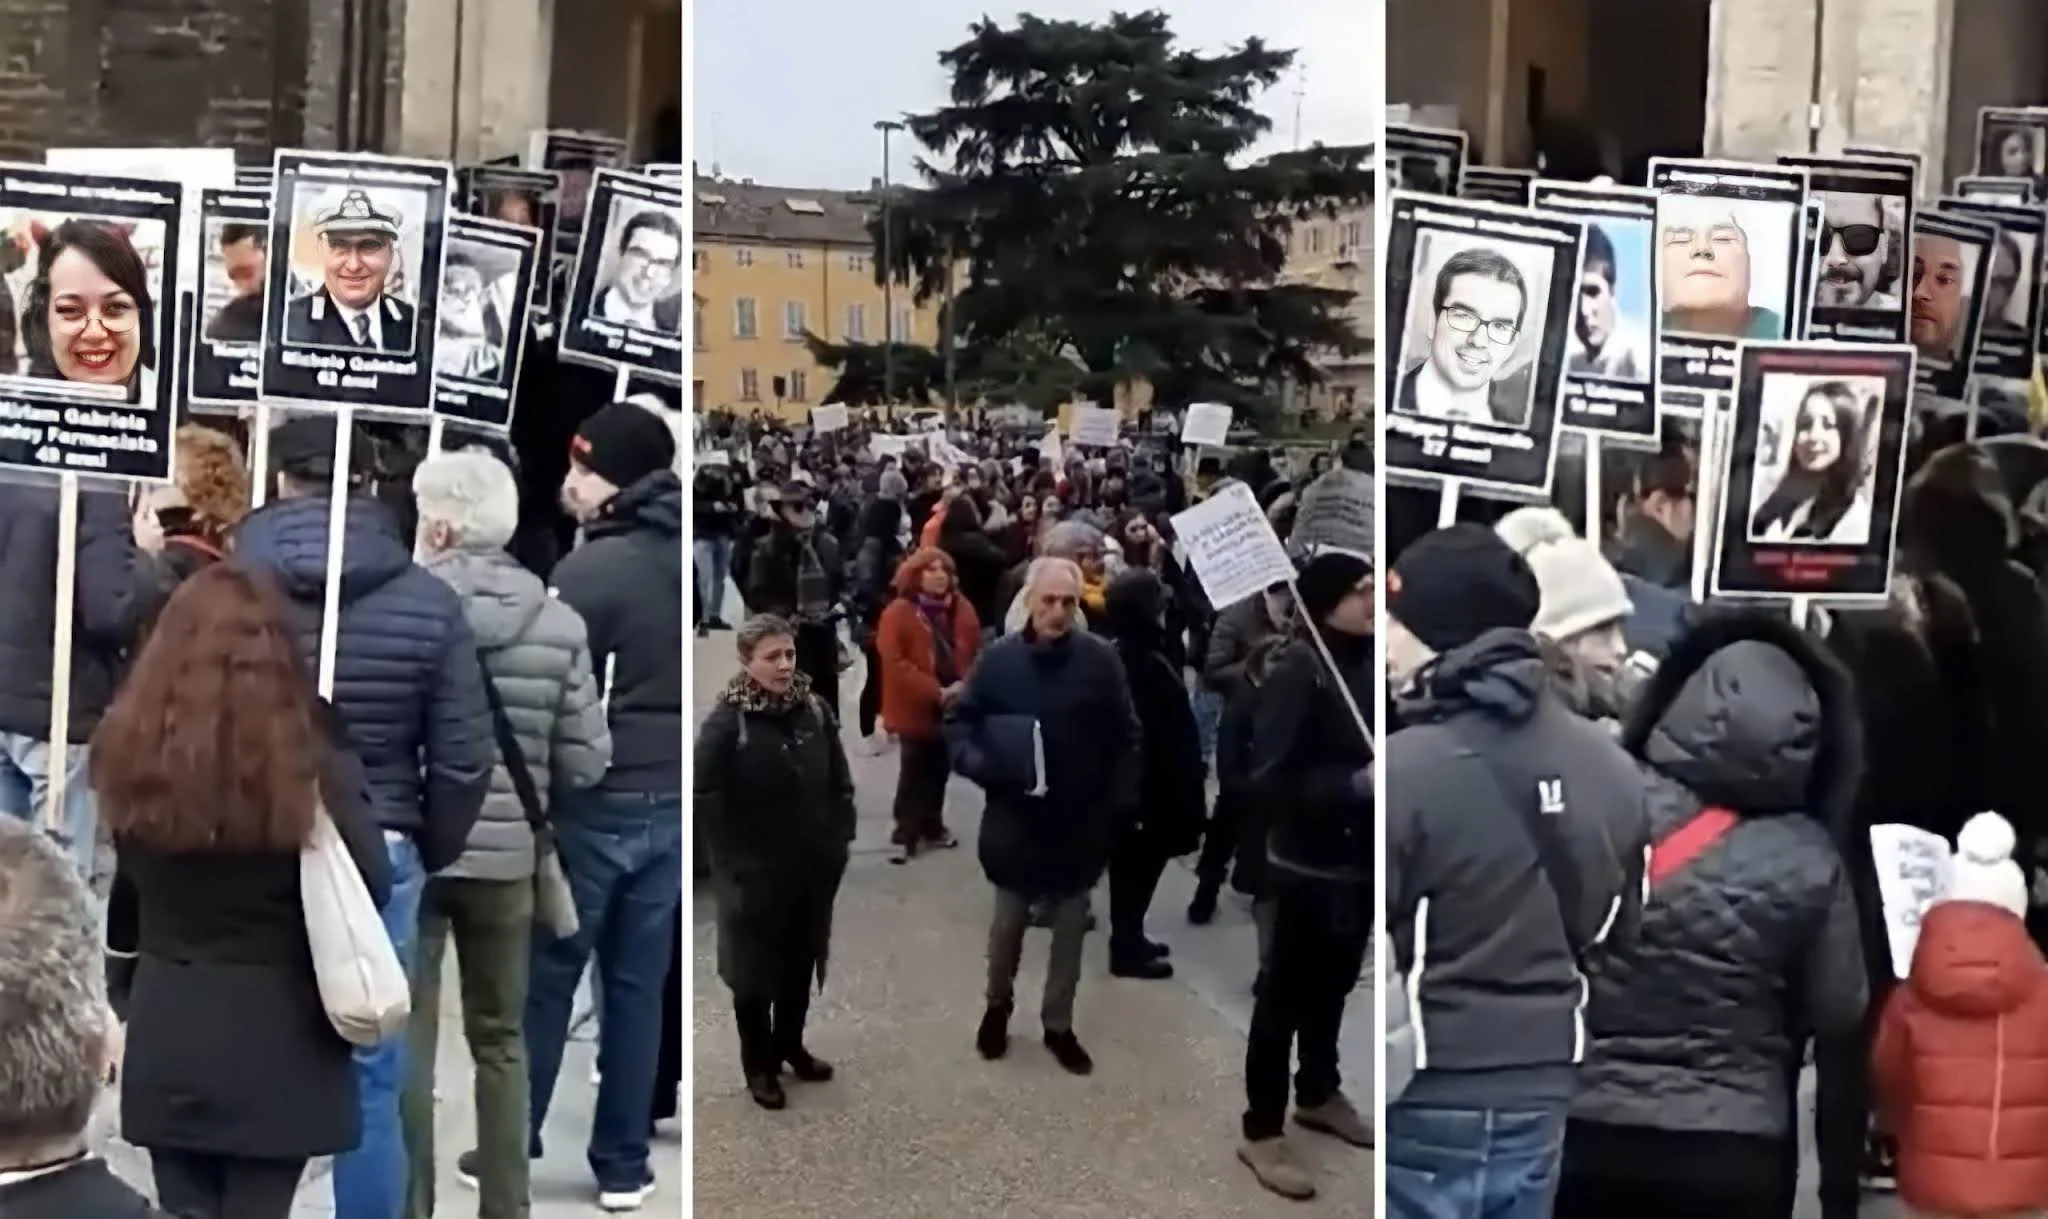 Italy Holds “March of the Vaccine Dead” to Commemorate those Who Died from The COVID-19 Vaccines (VIDEO)